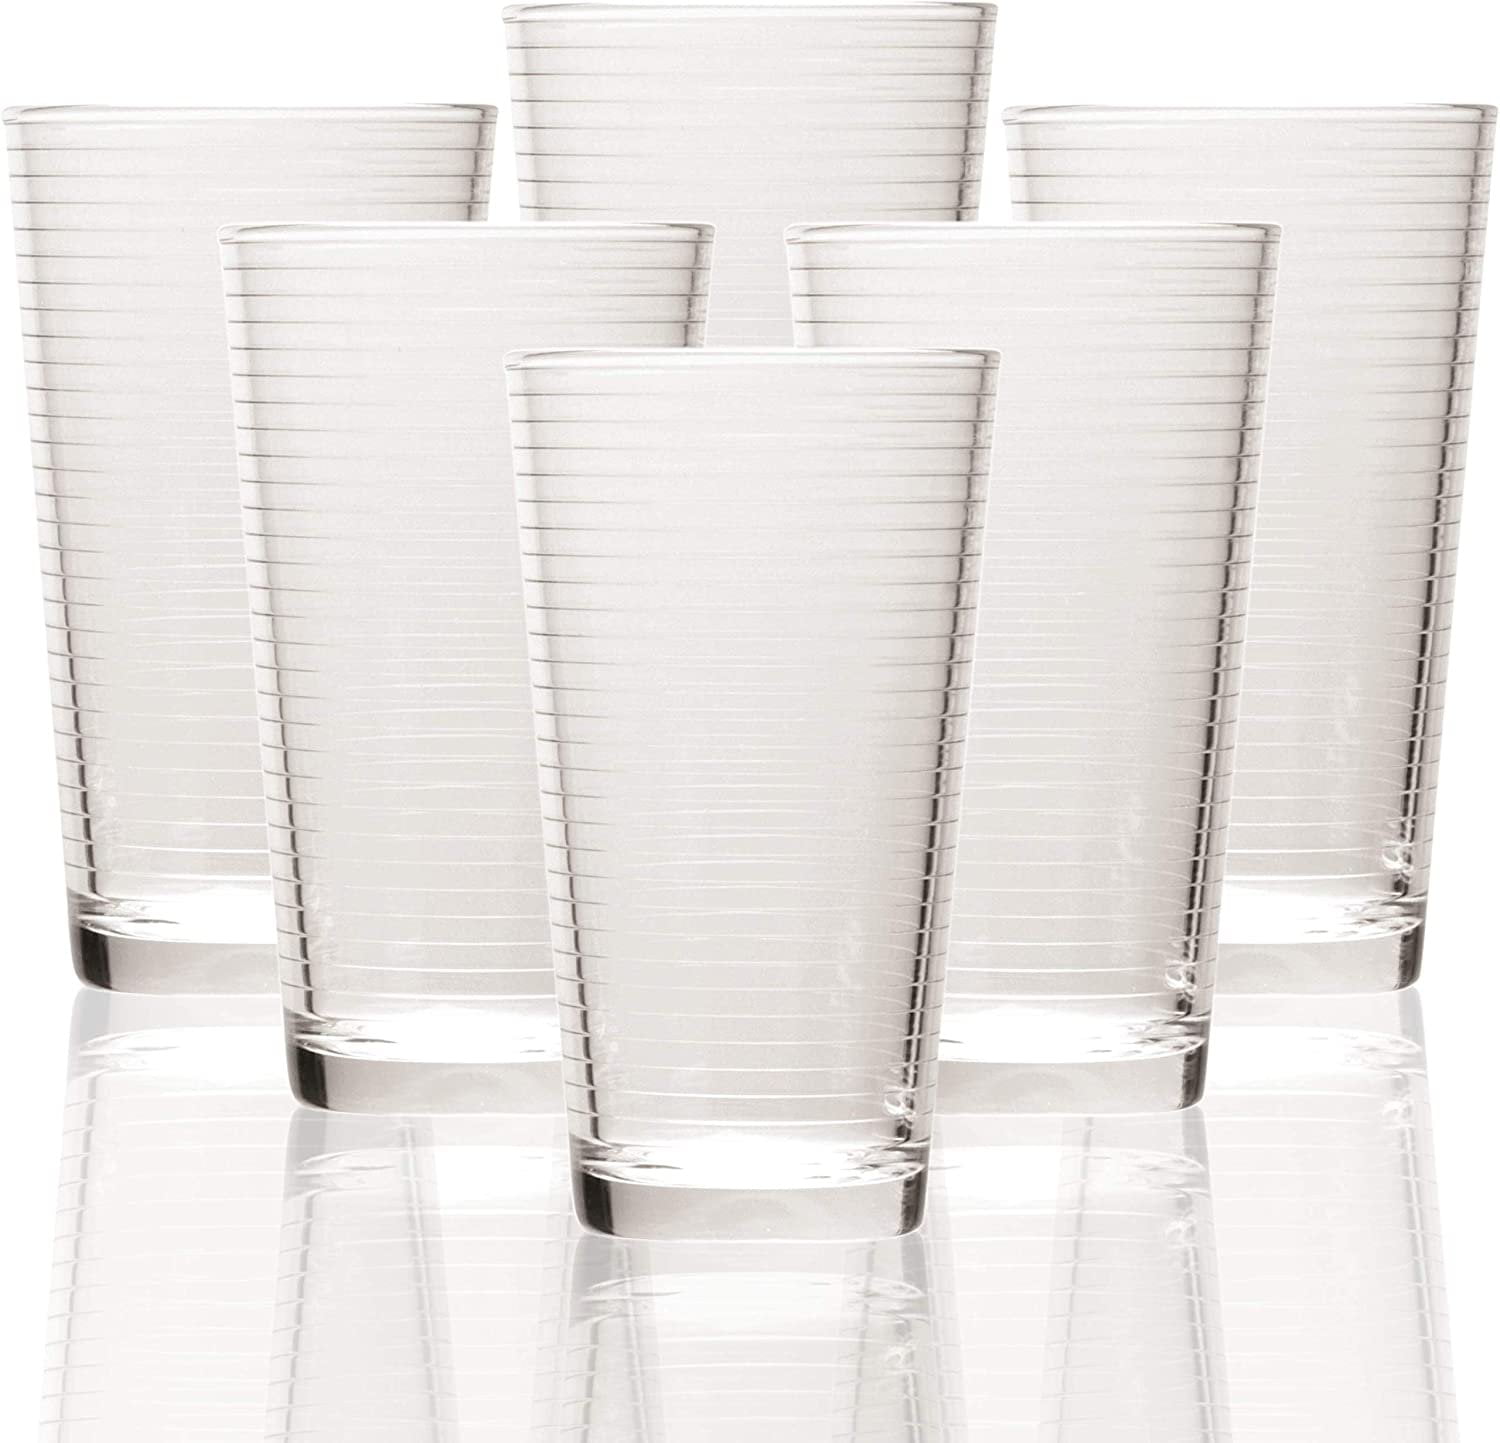 CUKBLESS Drinking Glasses Set of 6, Crystal Highball